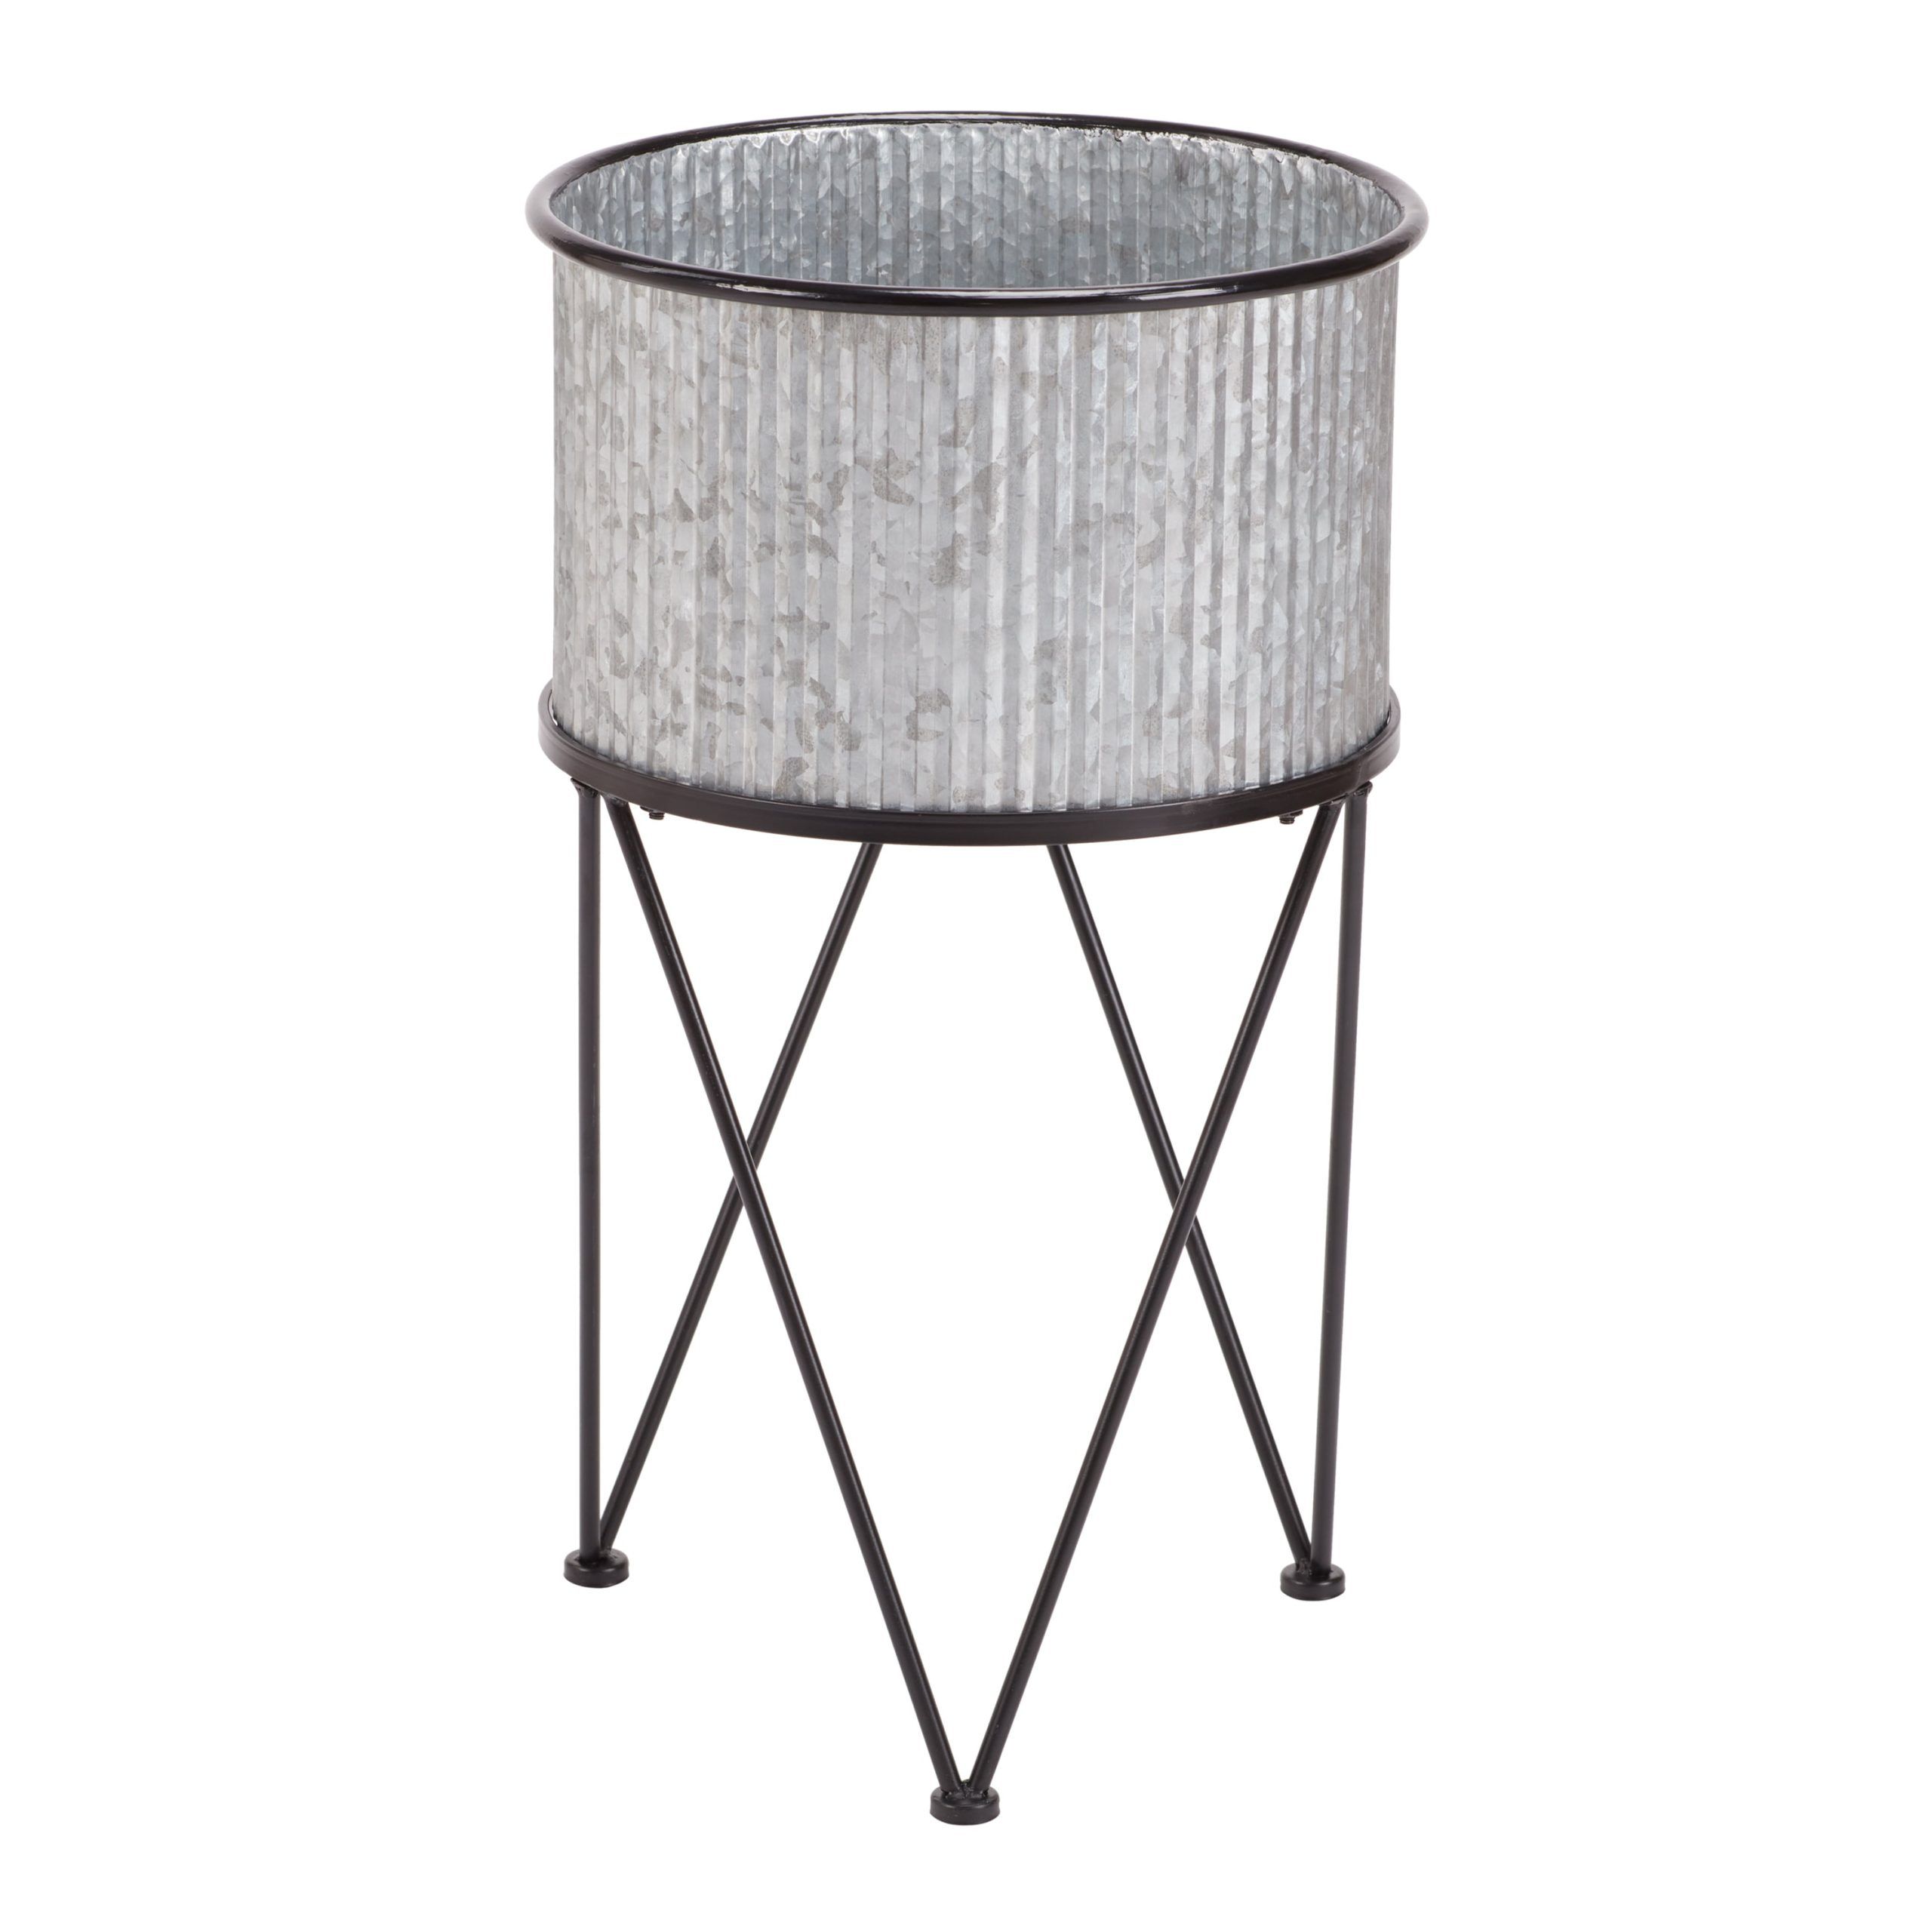 Trendy Galvanized Plant Stands Intended For Mainstays Karvel Galvanized Metal Column Planter With Stand, 15.7 In Dia (View 1 of 15)